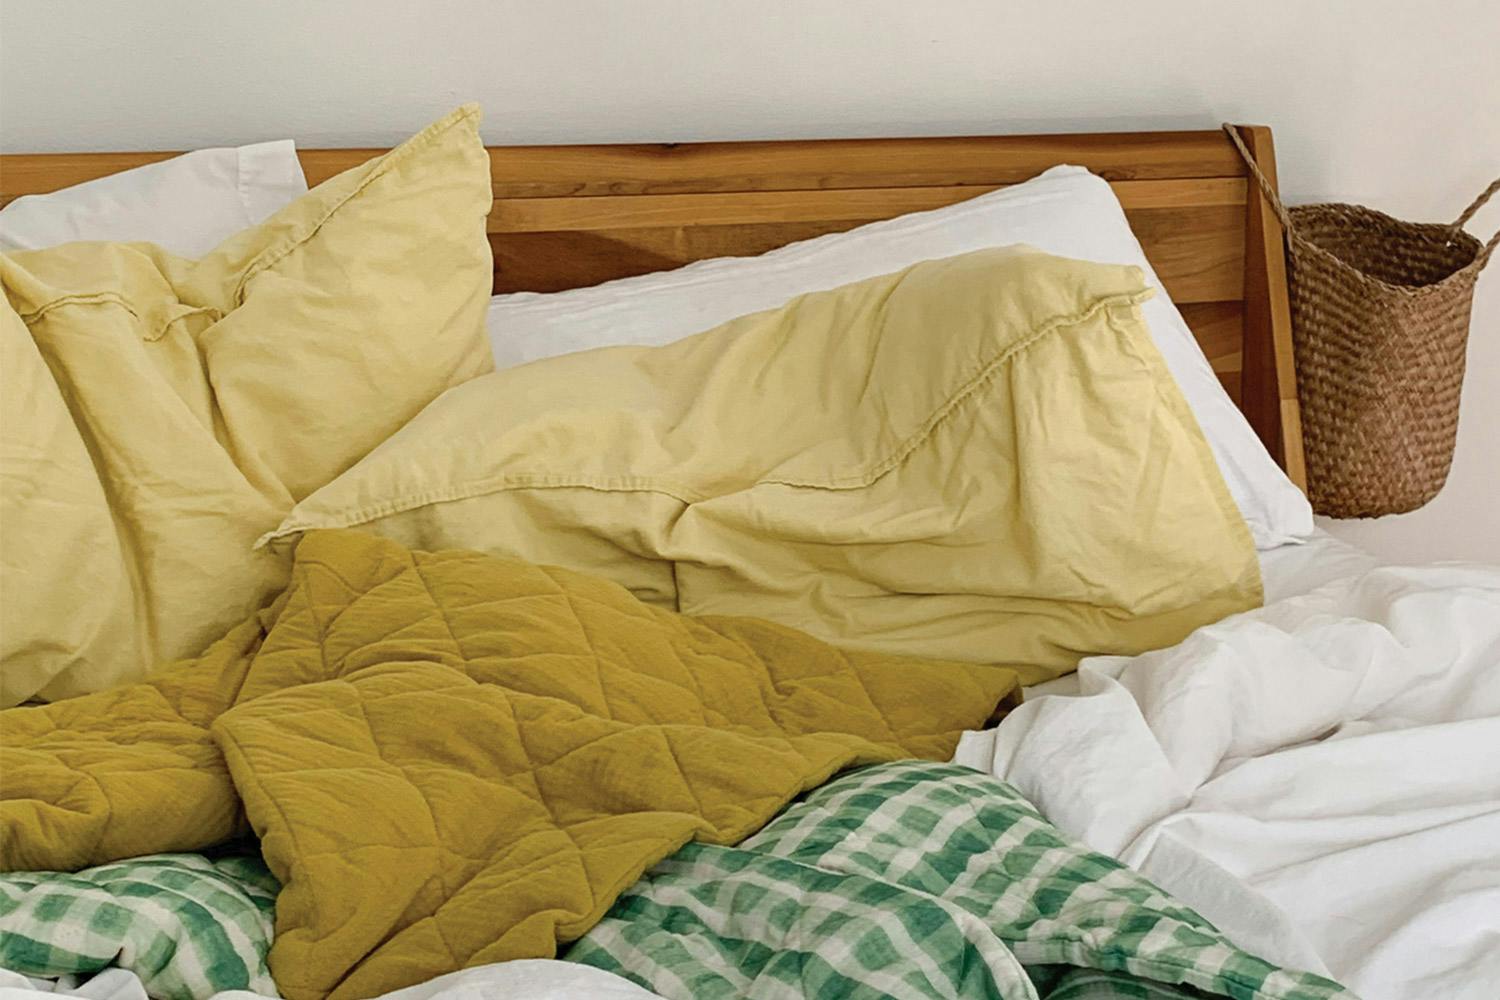 A wooden bed topped with soft-looking yellow, white, and checkered green bed sheets.